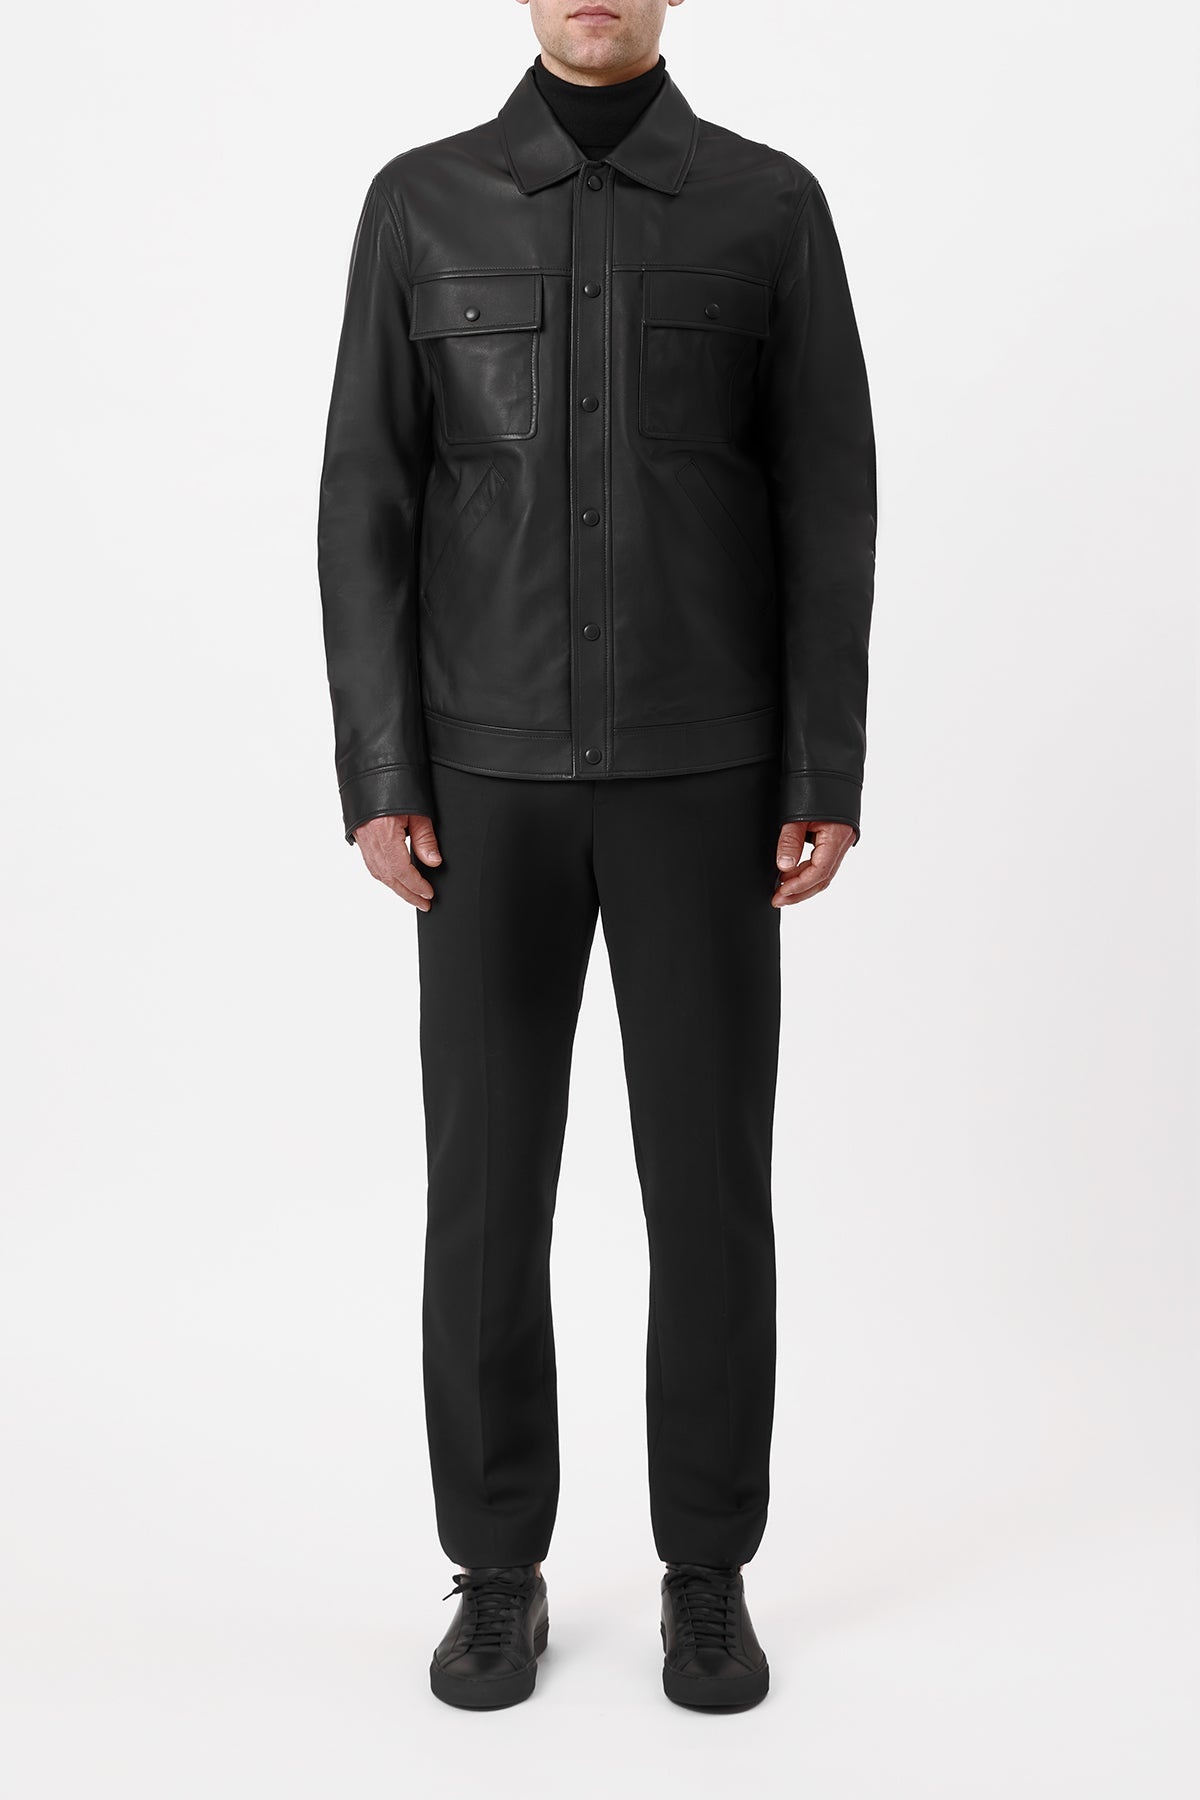 Levy Jacket in Black Nappa Leather - 3